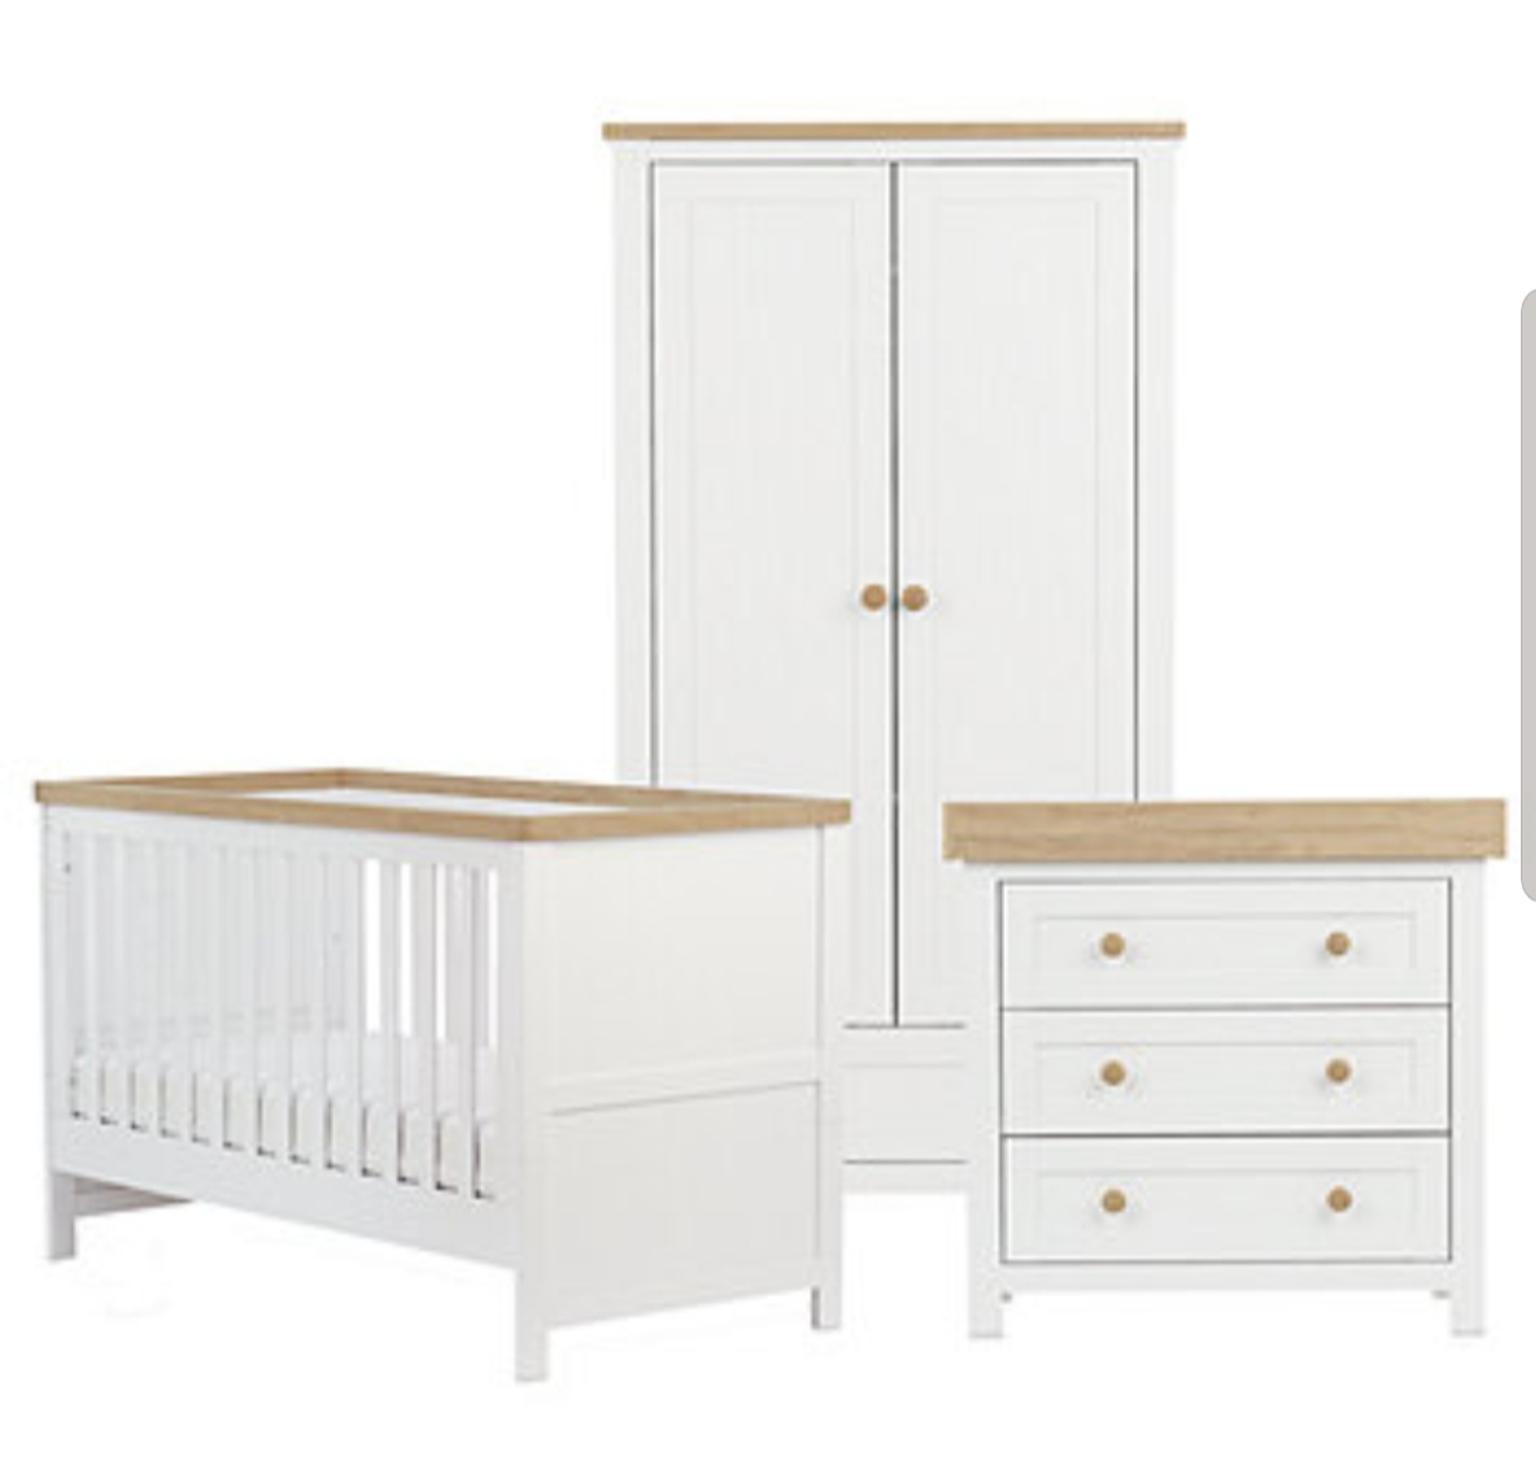 Mothercare Lulworth Nursery Furniture In St16 Stafford For 150 00